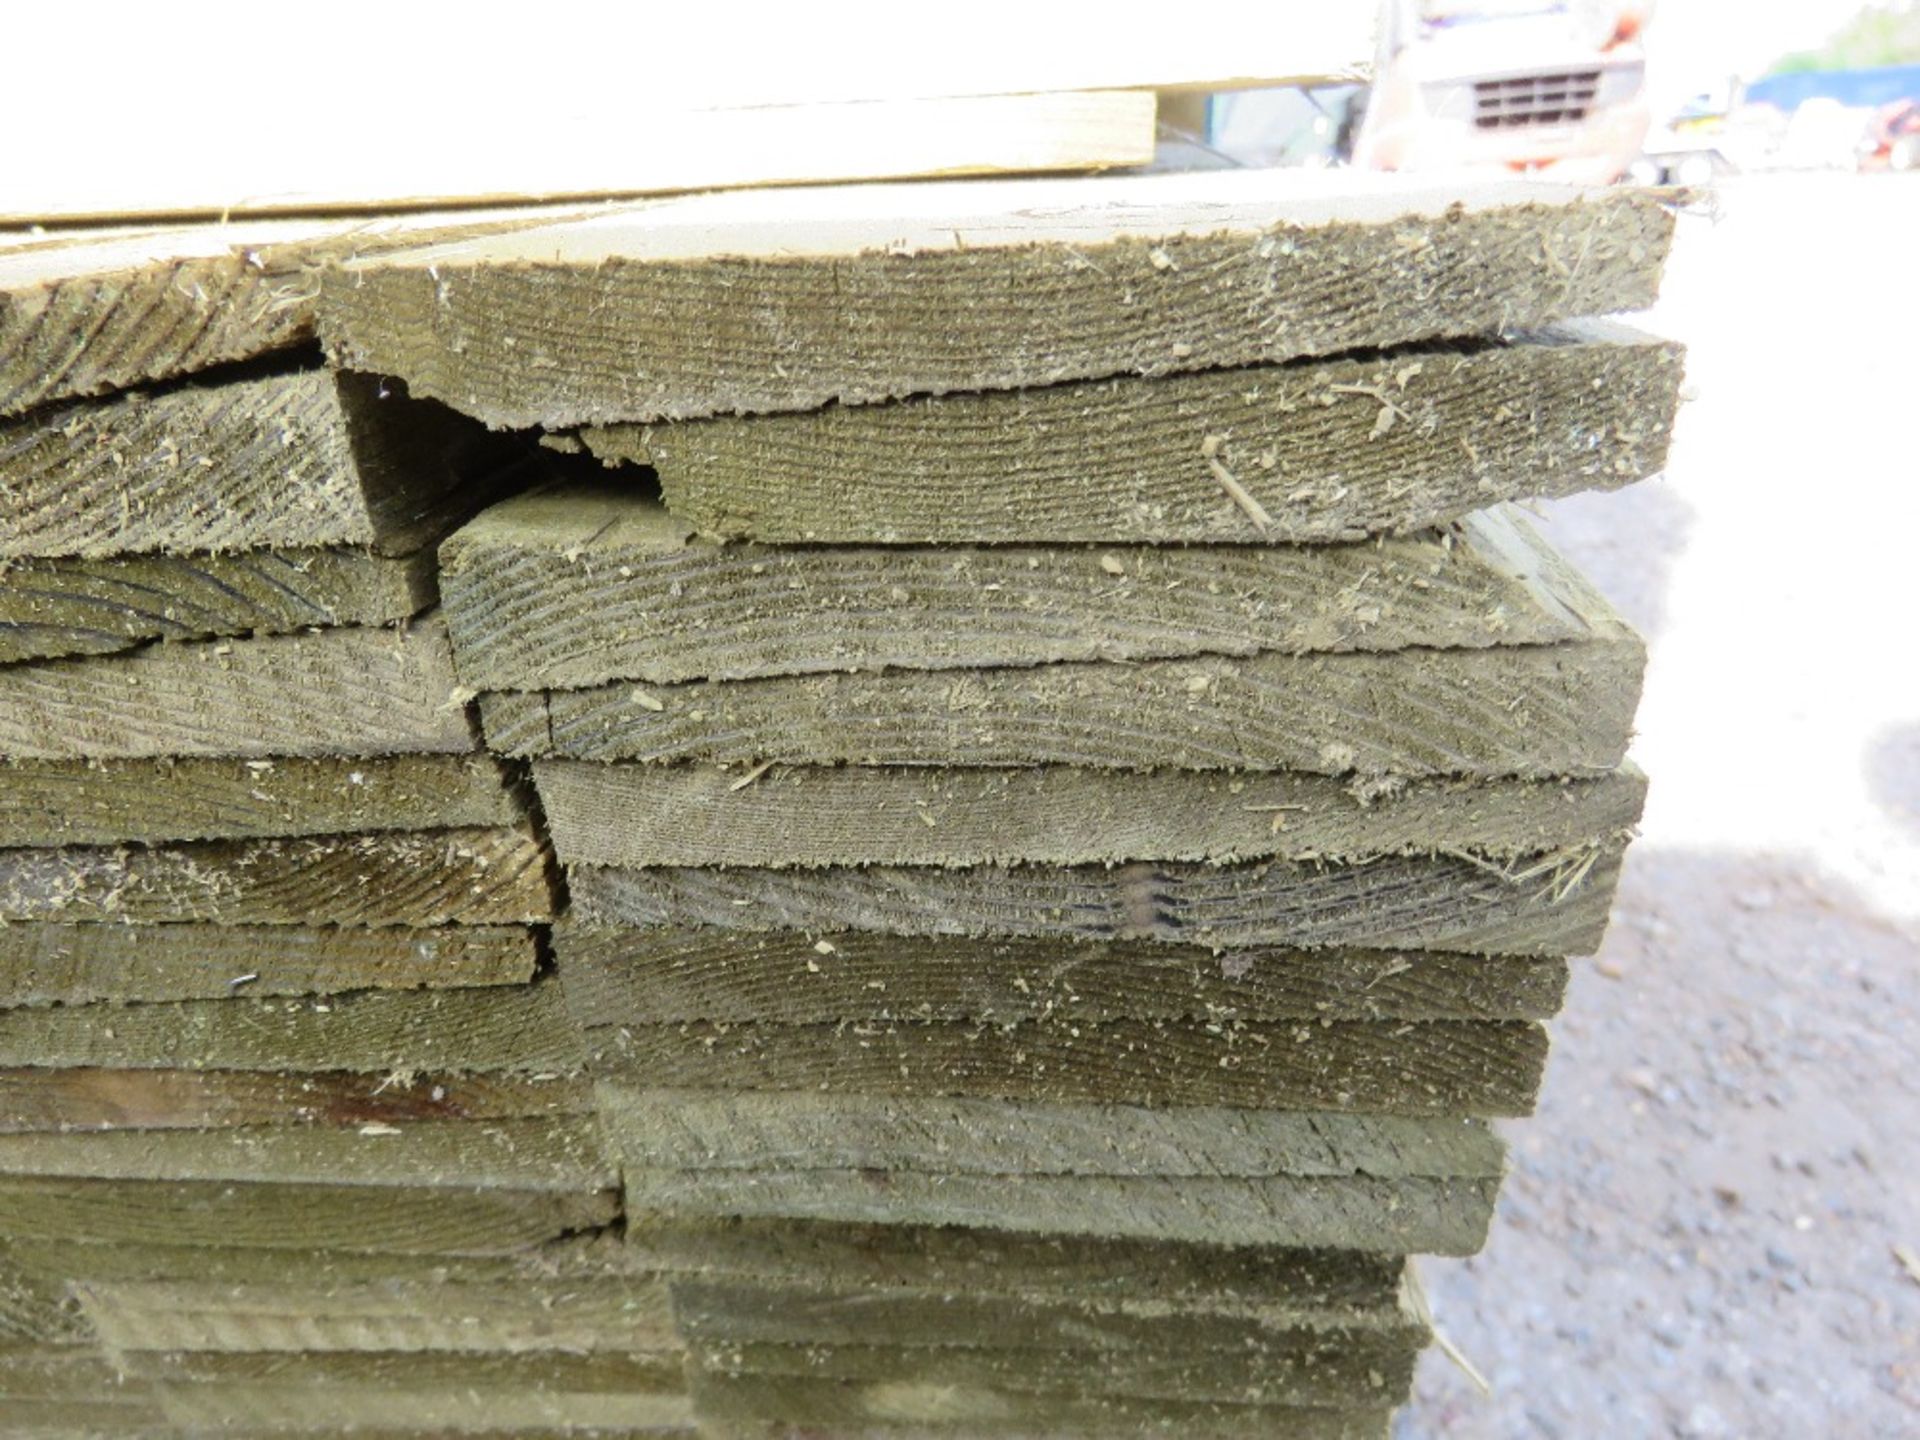 LARGE PACK OF PRESSURE TREATED FEATHER EDGE FENCE CLADDING TIMBER BOARDS. 1.8M LENGTH X 100MM WIDTH - Image 3 of 3